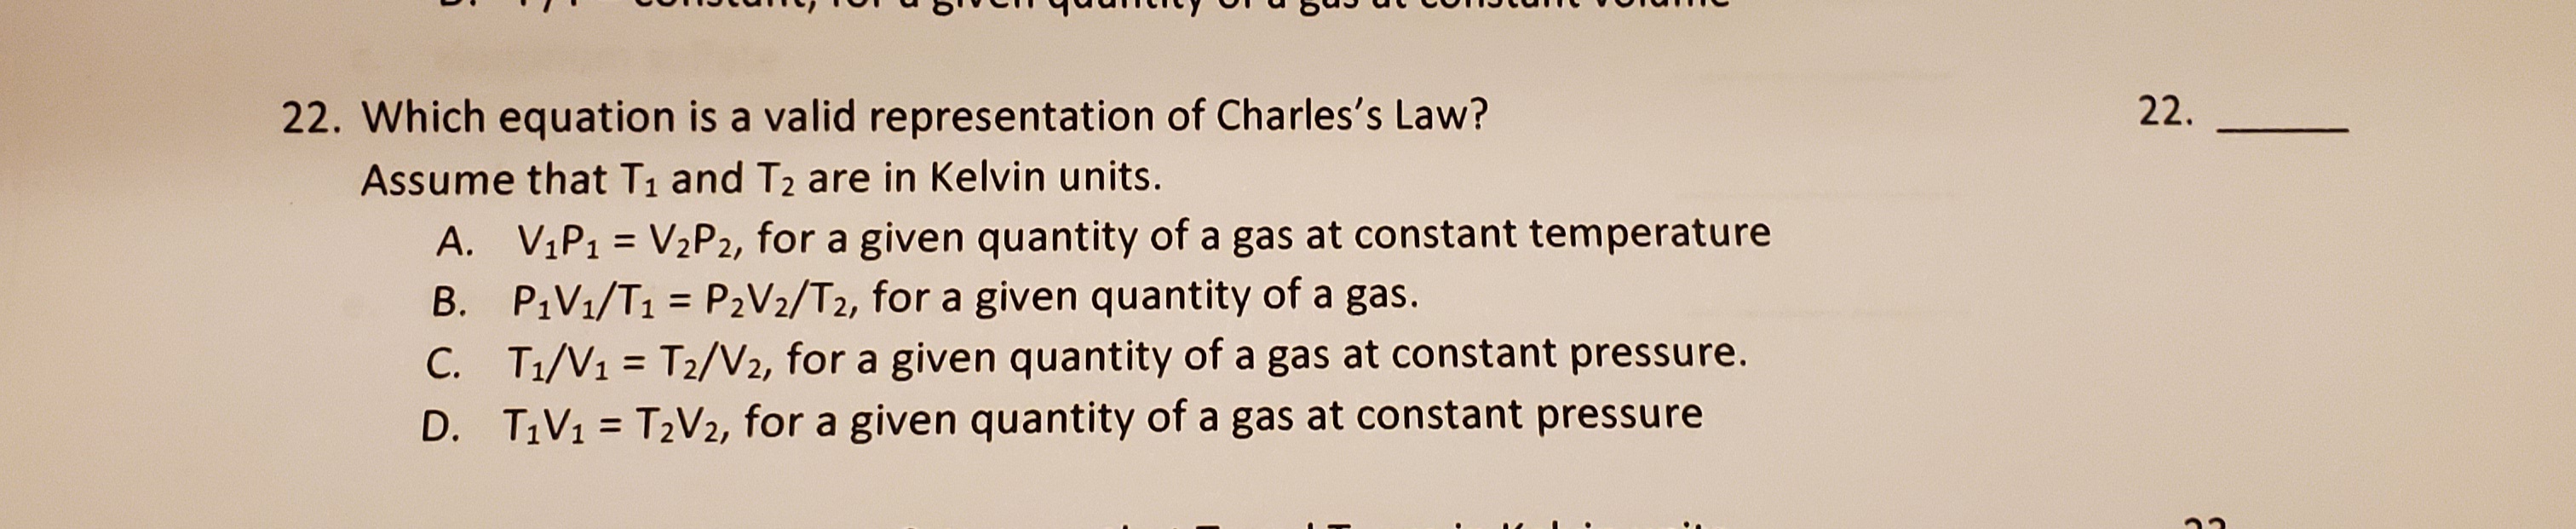 Which equation is a valid representation of Charles's Law?
Assume that T1 and T2 are in Kelvin units.
A. VIP1 = V2P2, for a given quantity of a gas at constant temperature
B. P1V1/T1 = P2V2/T2, for a given quantity of a gas.
C. T1/V1 = T2/V2, for a given quantity of a gas at constant pressure.
%3D
%3D
D. T1V1 = T2V2, for a given quantity of a gas at constant pressure
%3D
